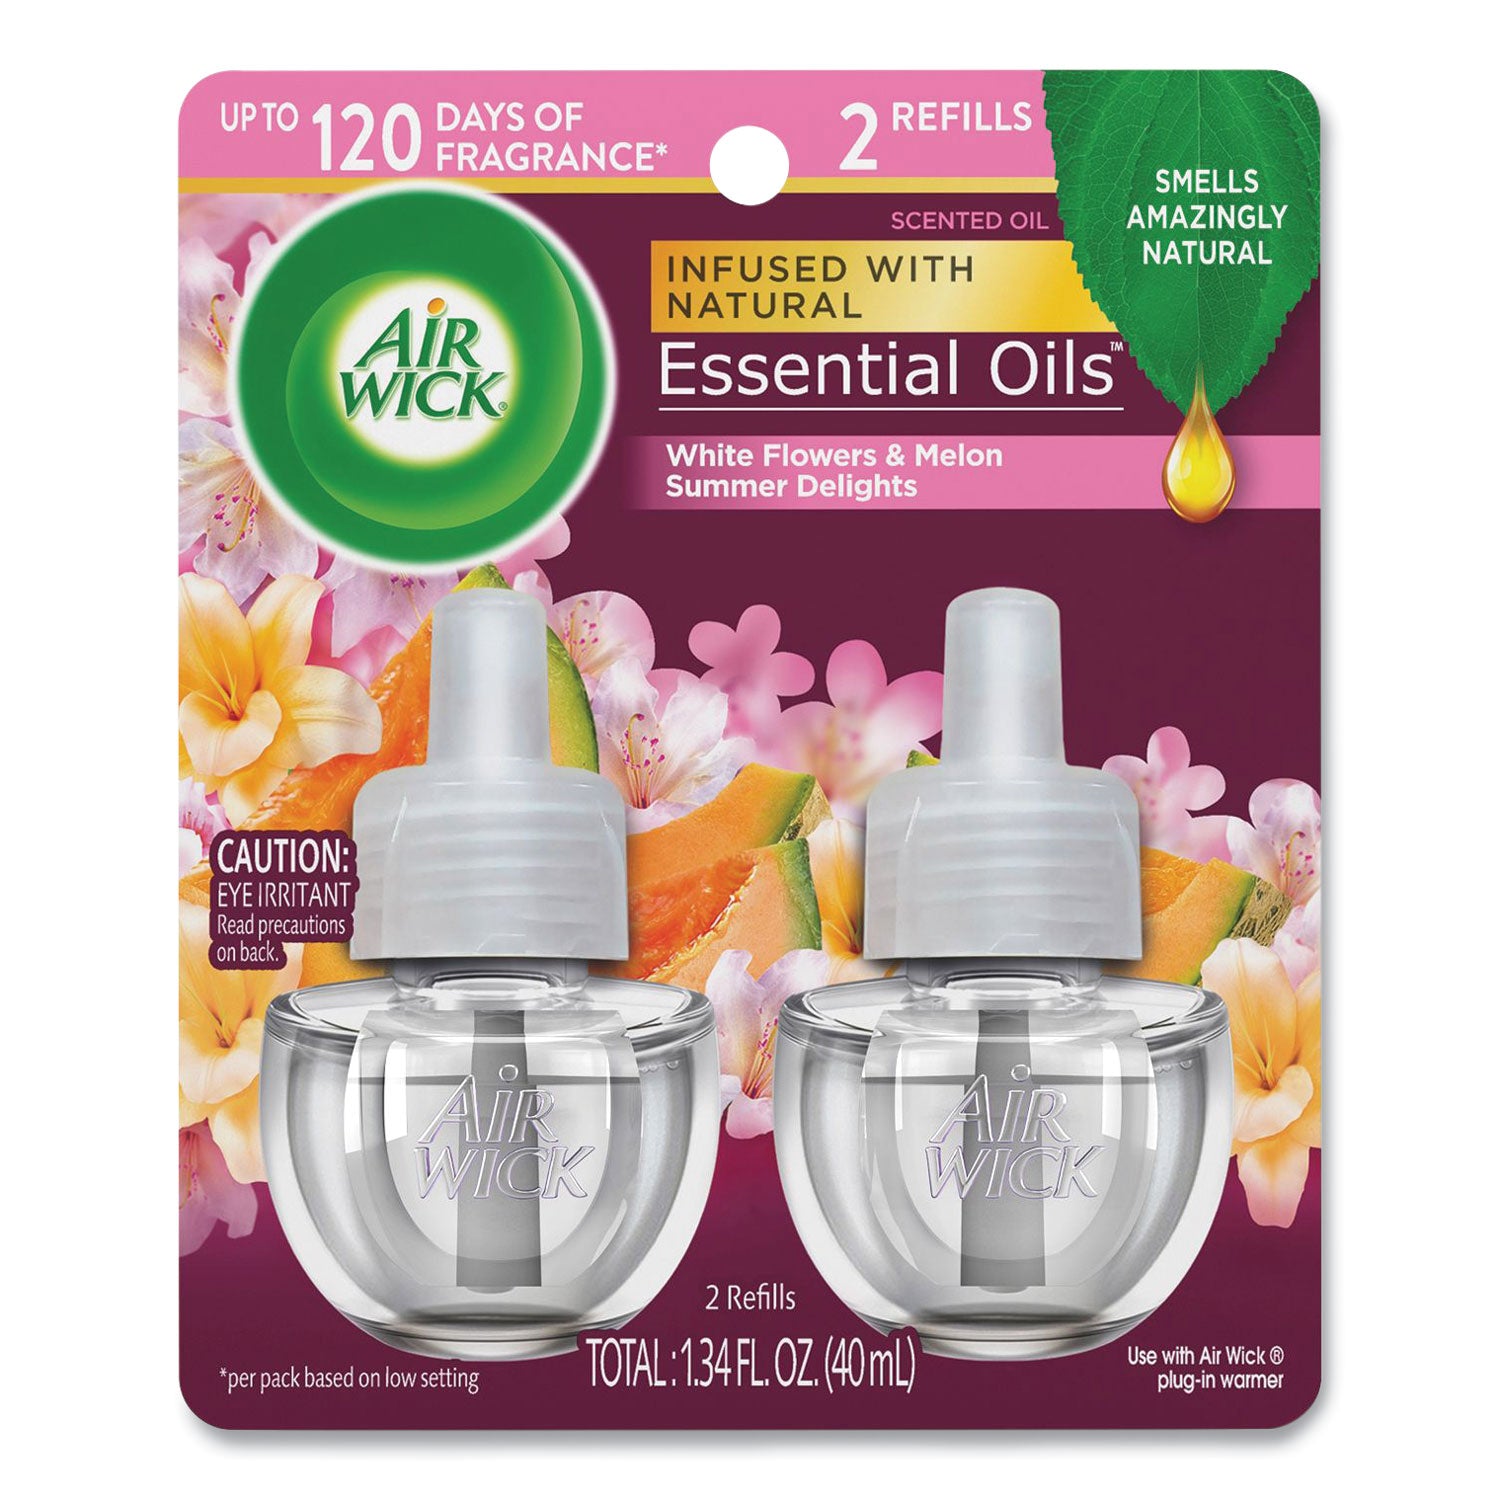 life-scents-scented-oil-refills-summer-delights-067-oz-2-pack_rac91112pk - 2